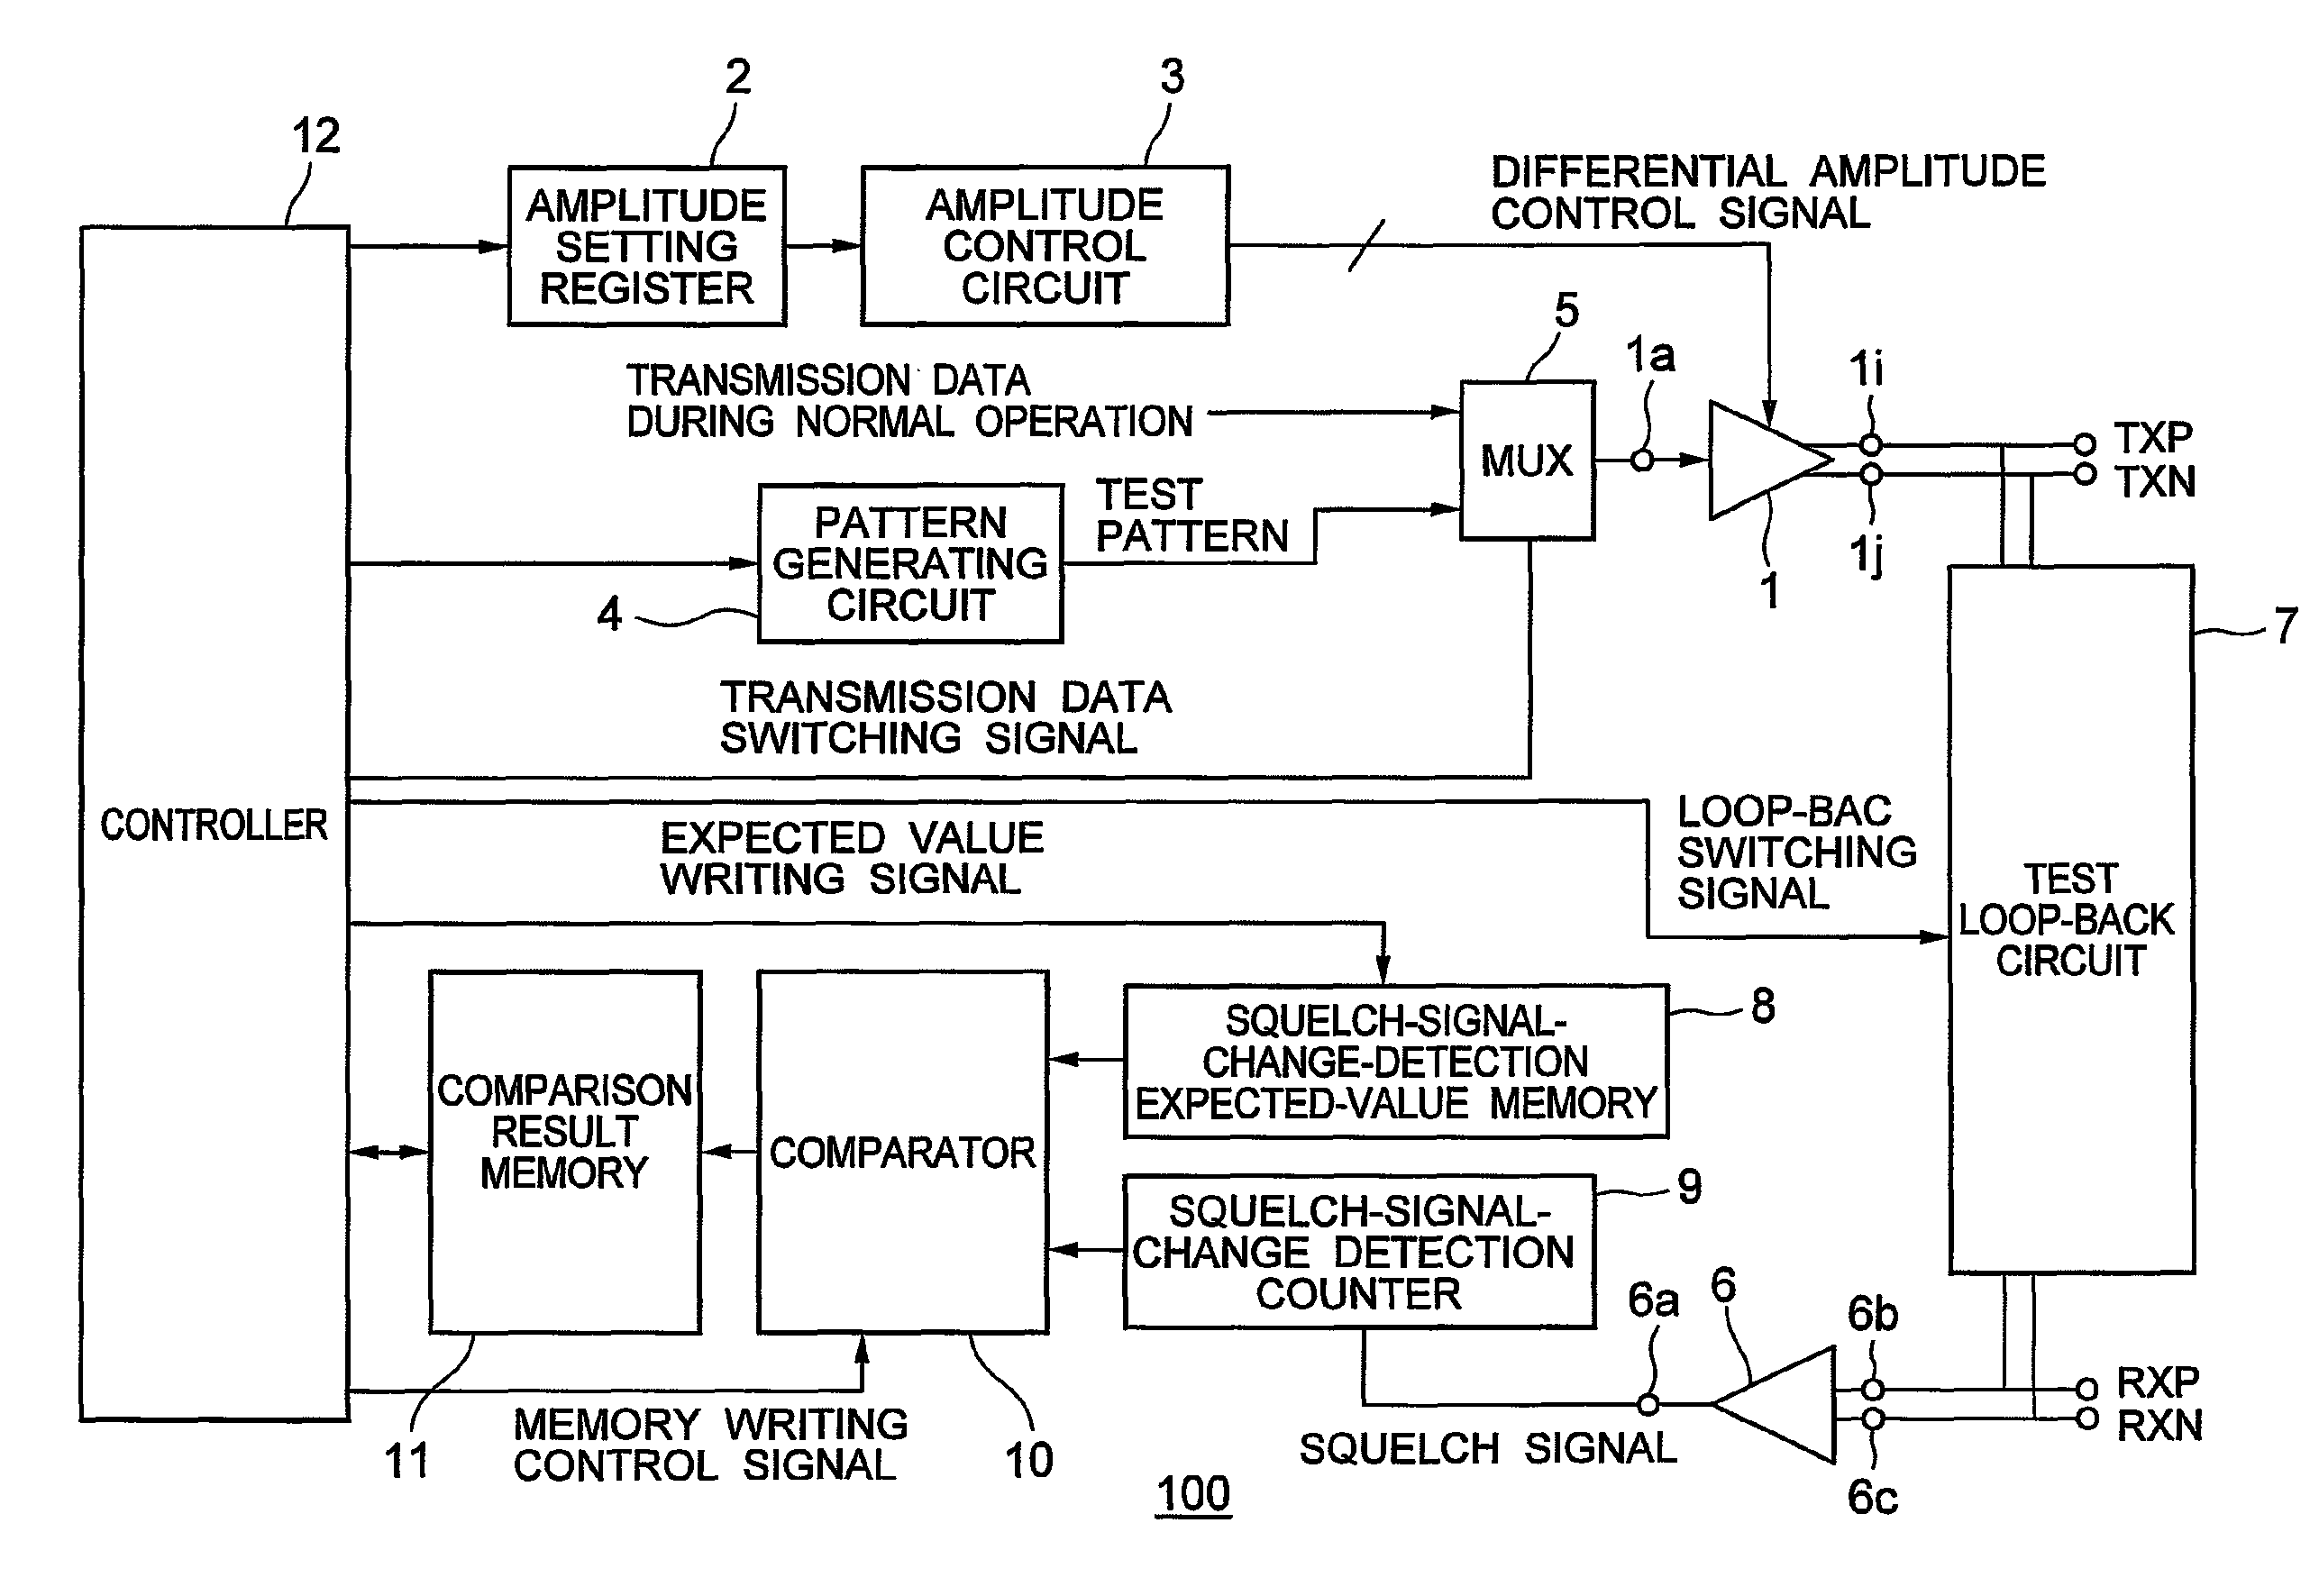 Automatic adjustment circuit for amplitude of differential signal